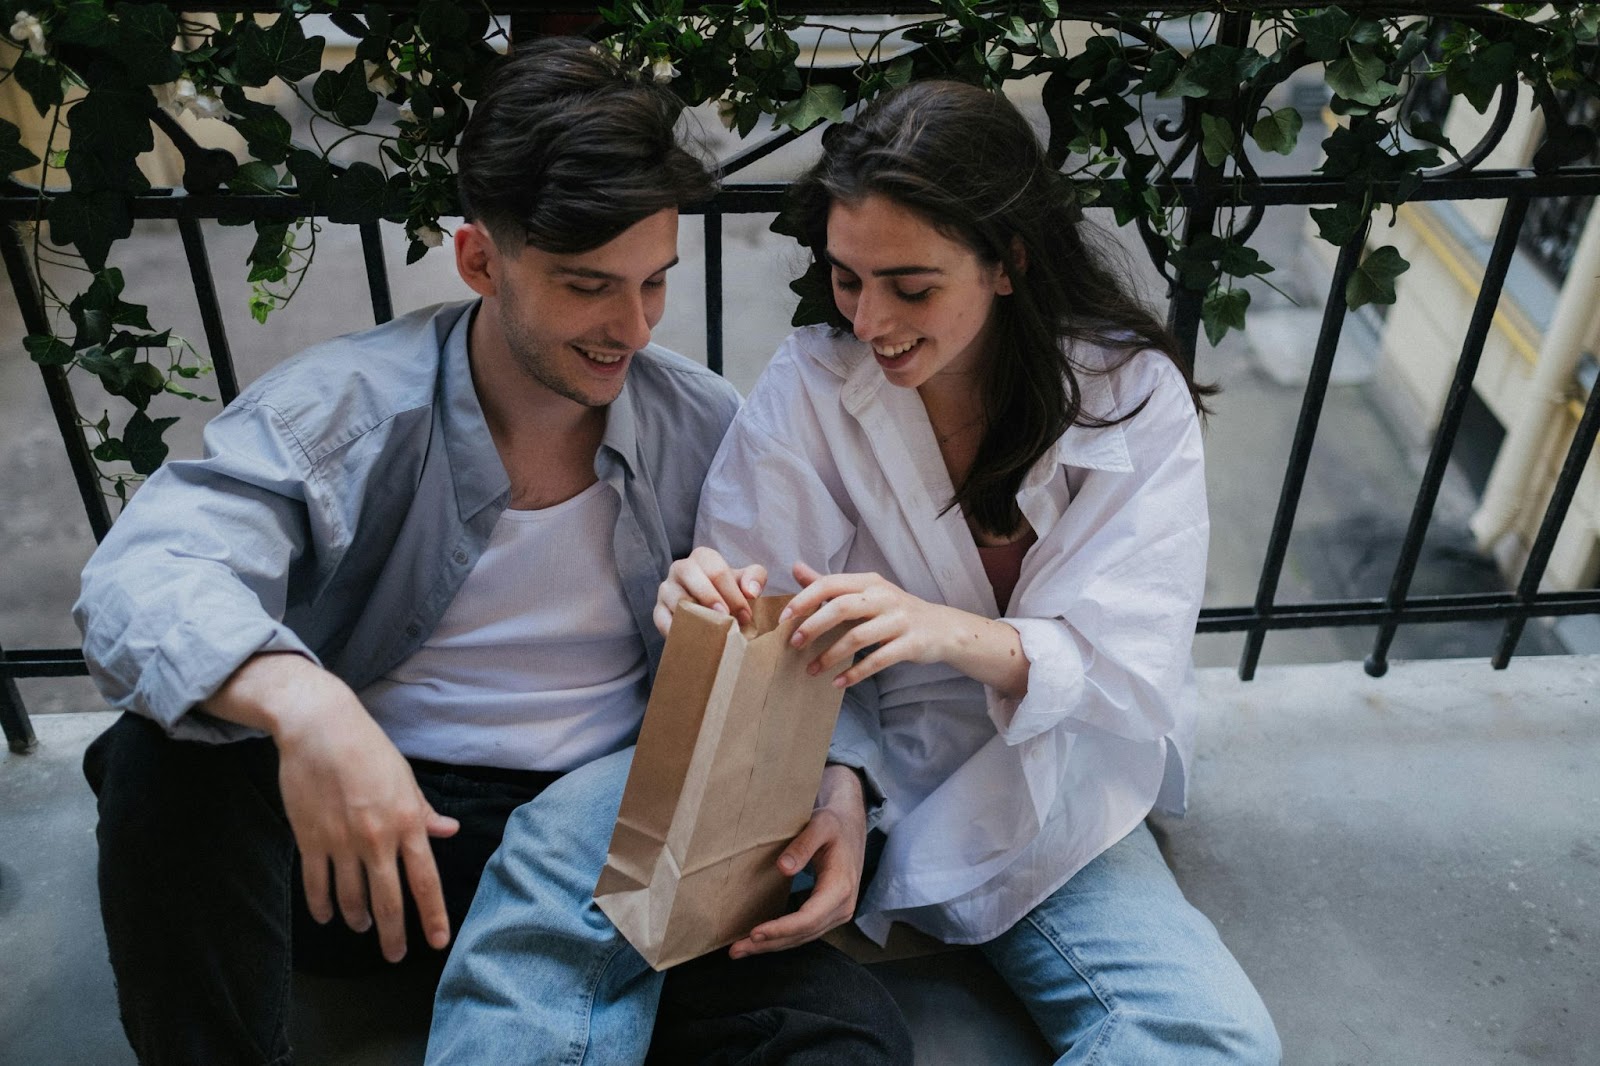 Man and woman sitting together holding a brown paper bag.
